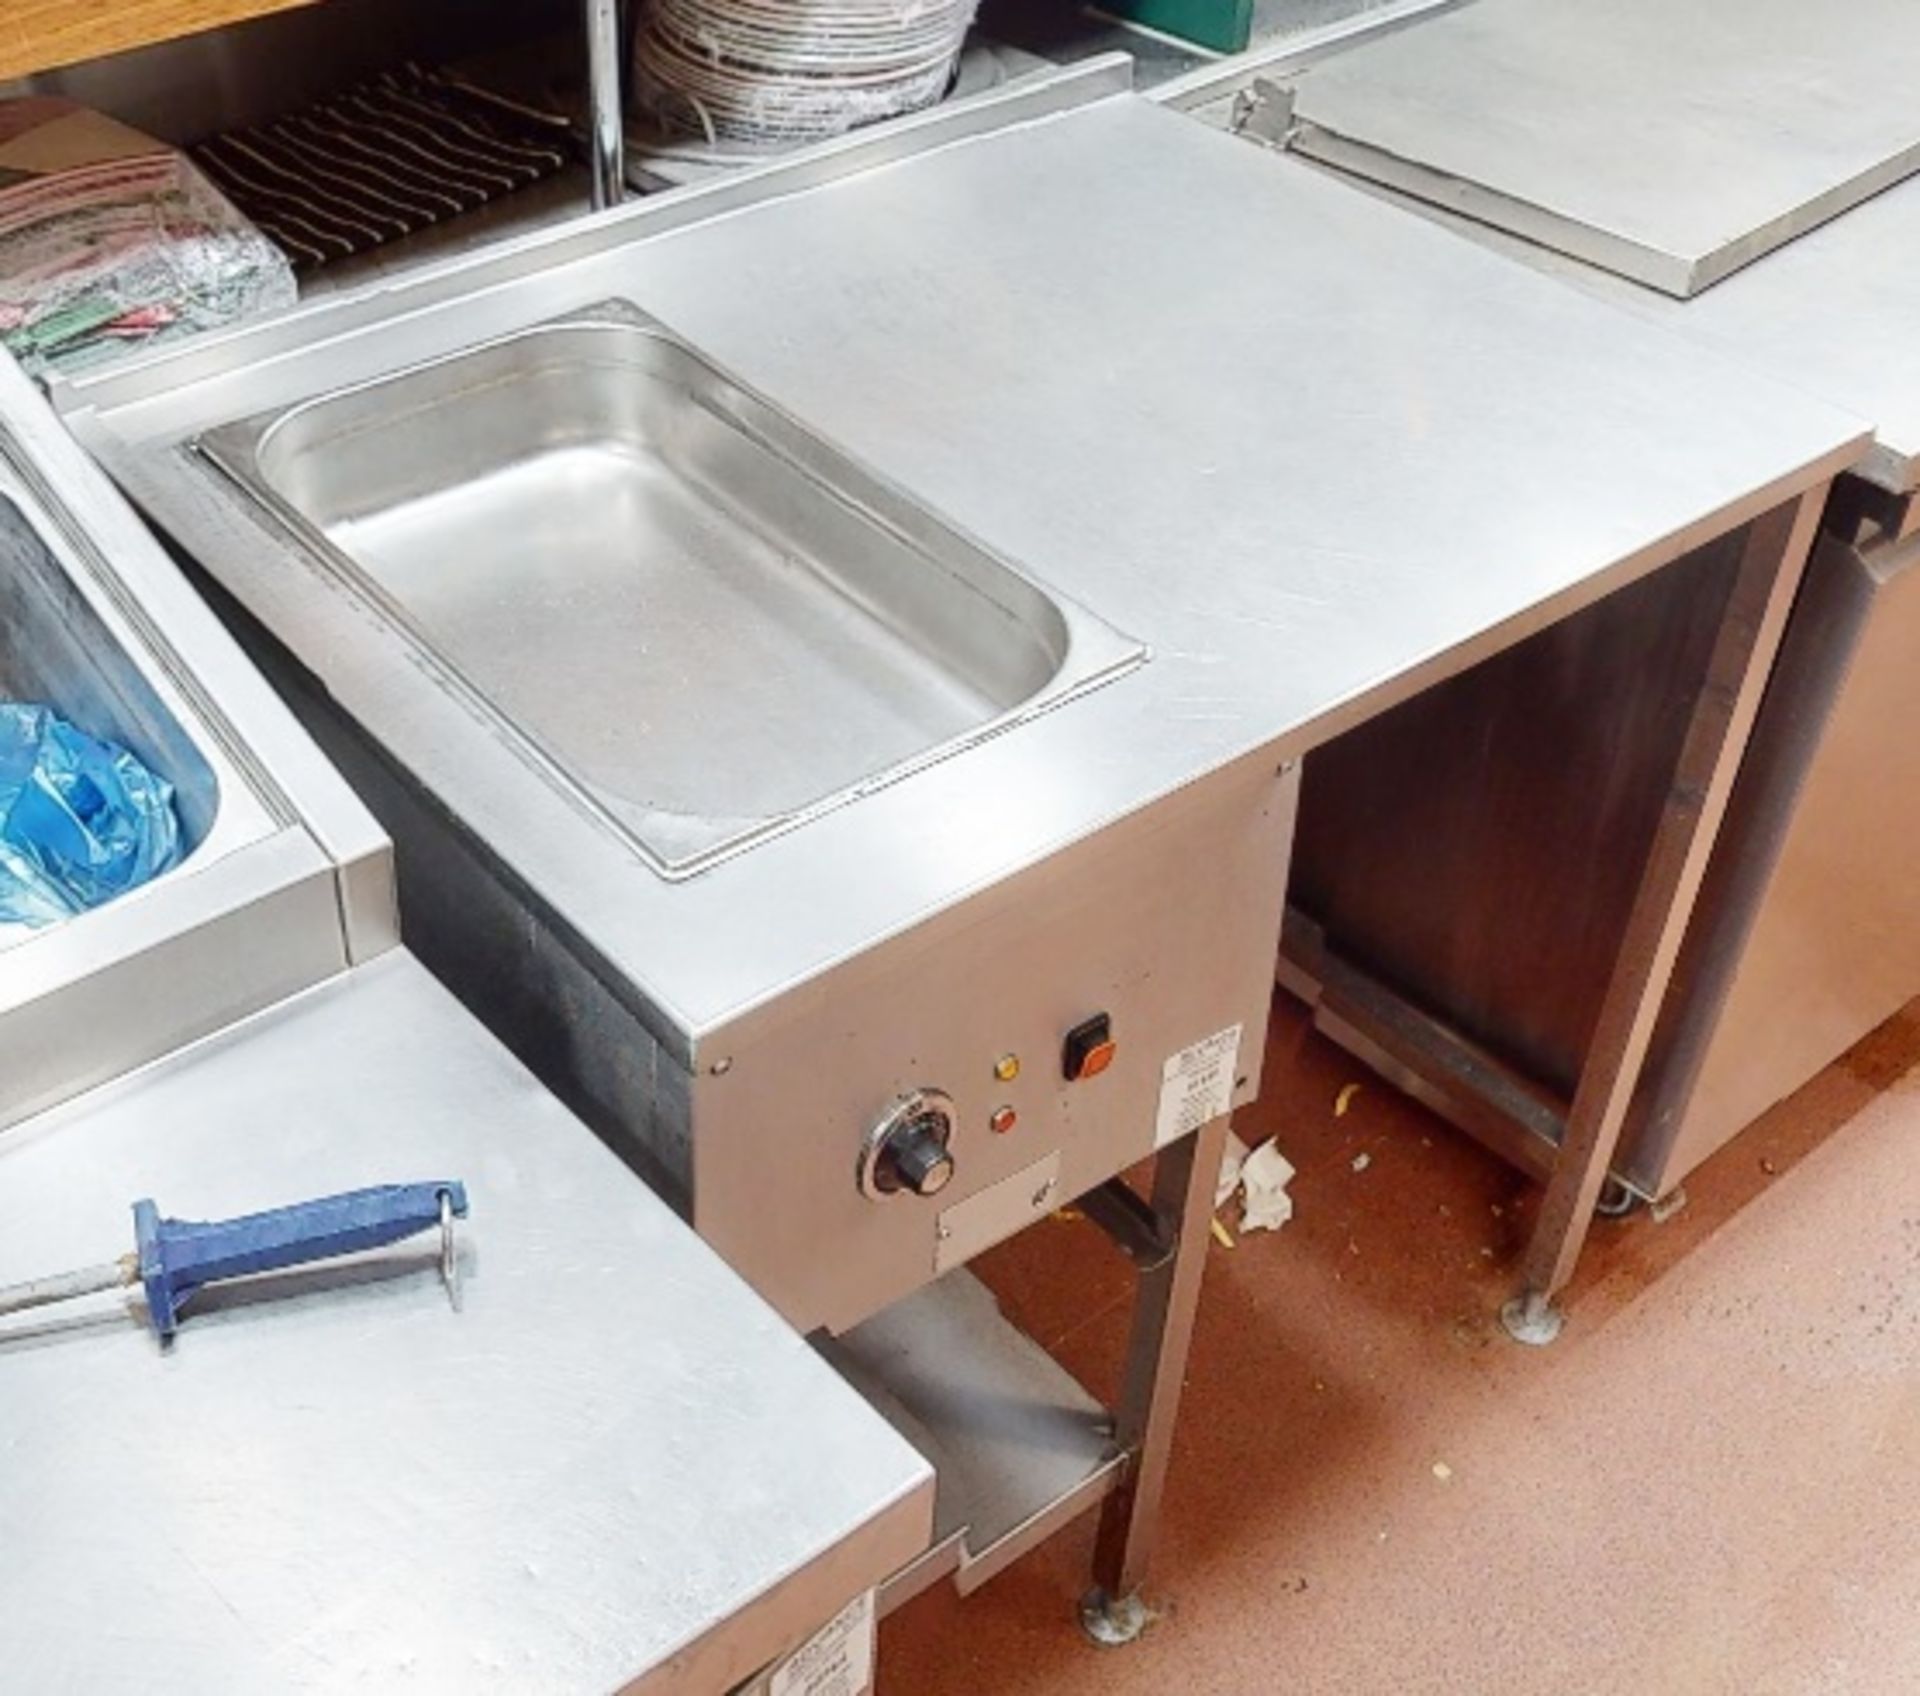 1 x Stainless Steel Commercial Warmer Unit - Ref: GEN549 WH2 - CL802 UX - Location: Altrincham